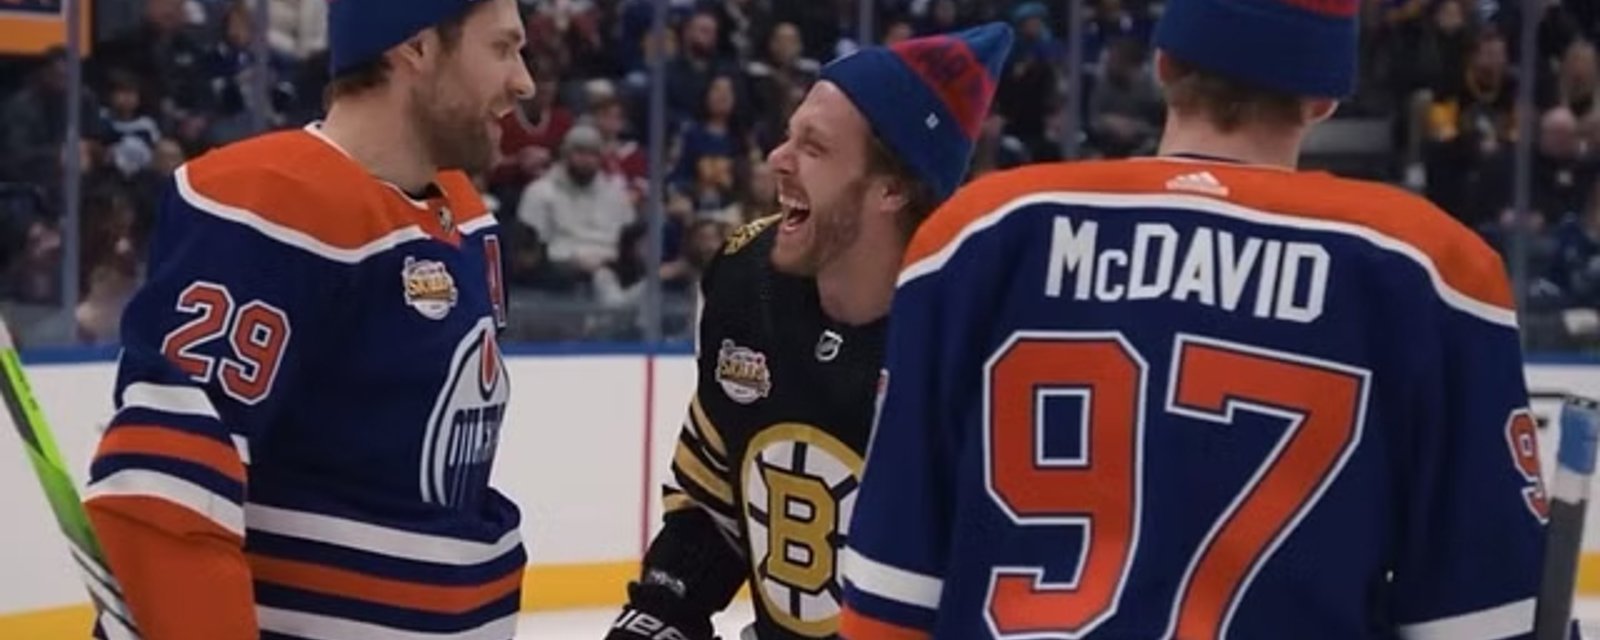 David Pastrnak lands in hot water after comments on Leon Draisaitl